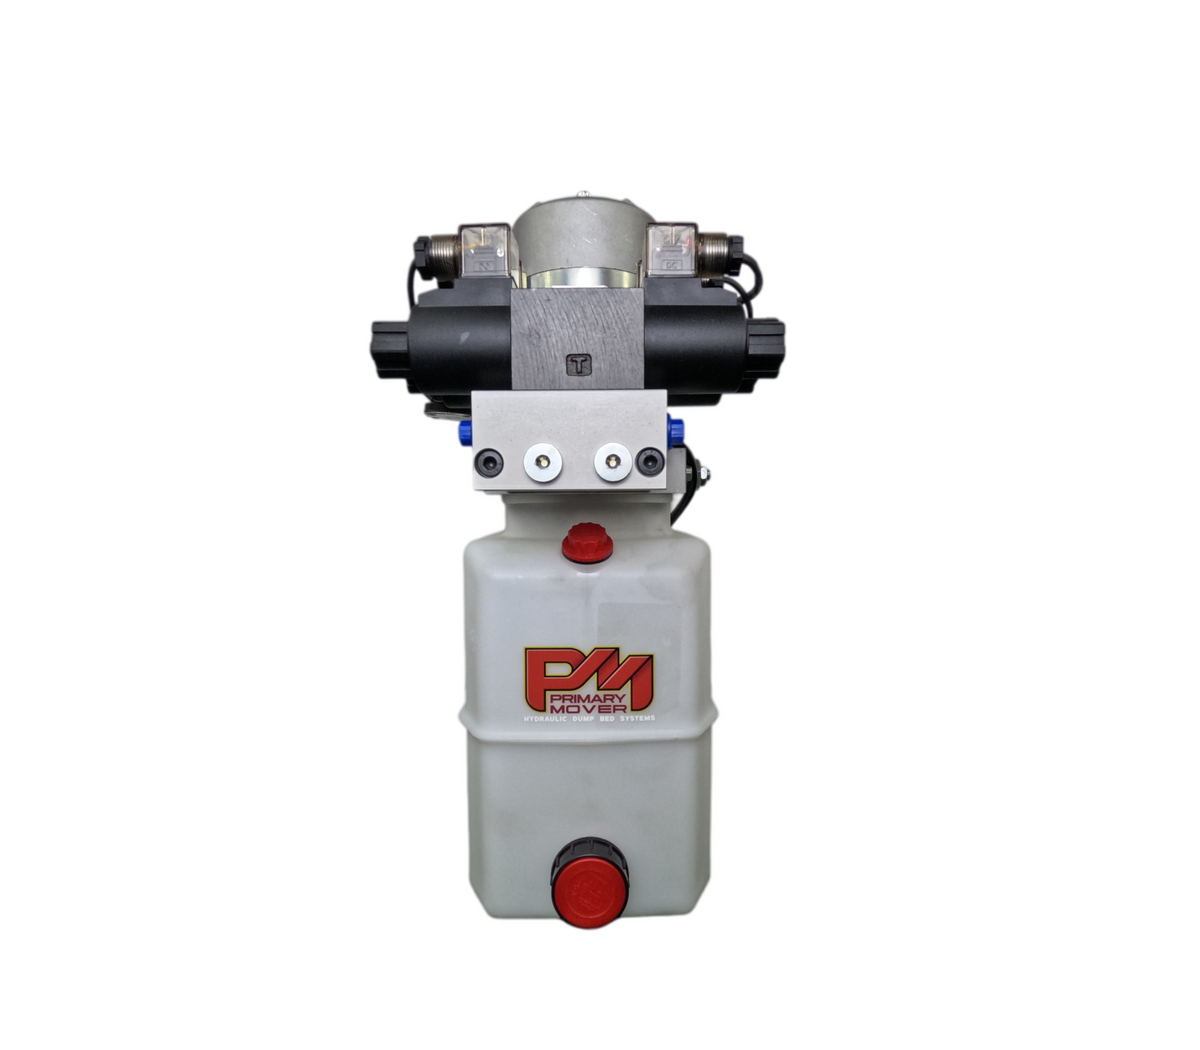 Primary Mover 12V Dual Double-Acting Hydraulic Power Unit | PFP-DD06P: Compact, powerful unit for dump trailers and trucks, enabling four hydraulic actions simultaneously.